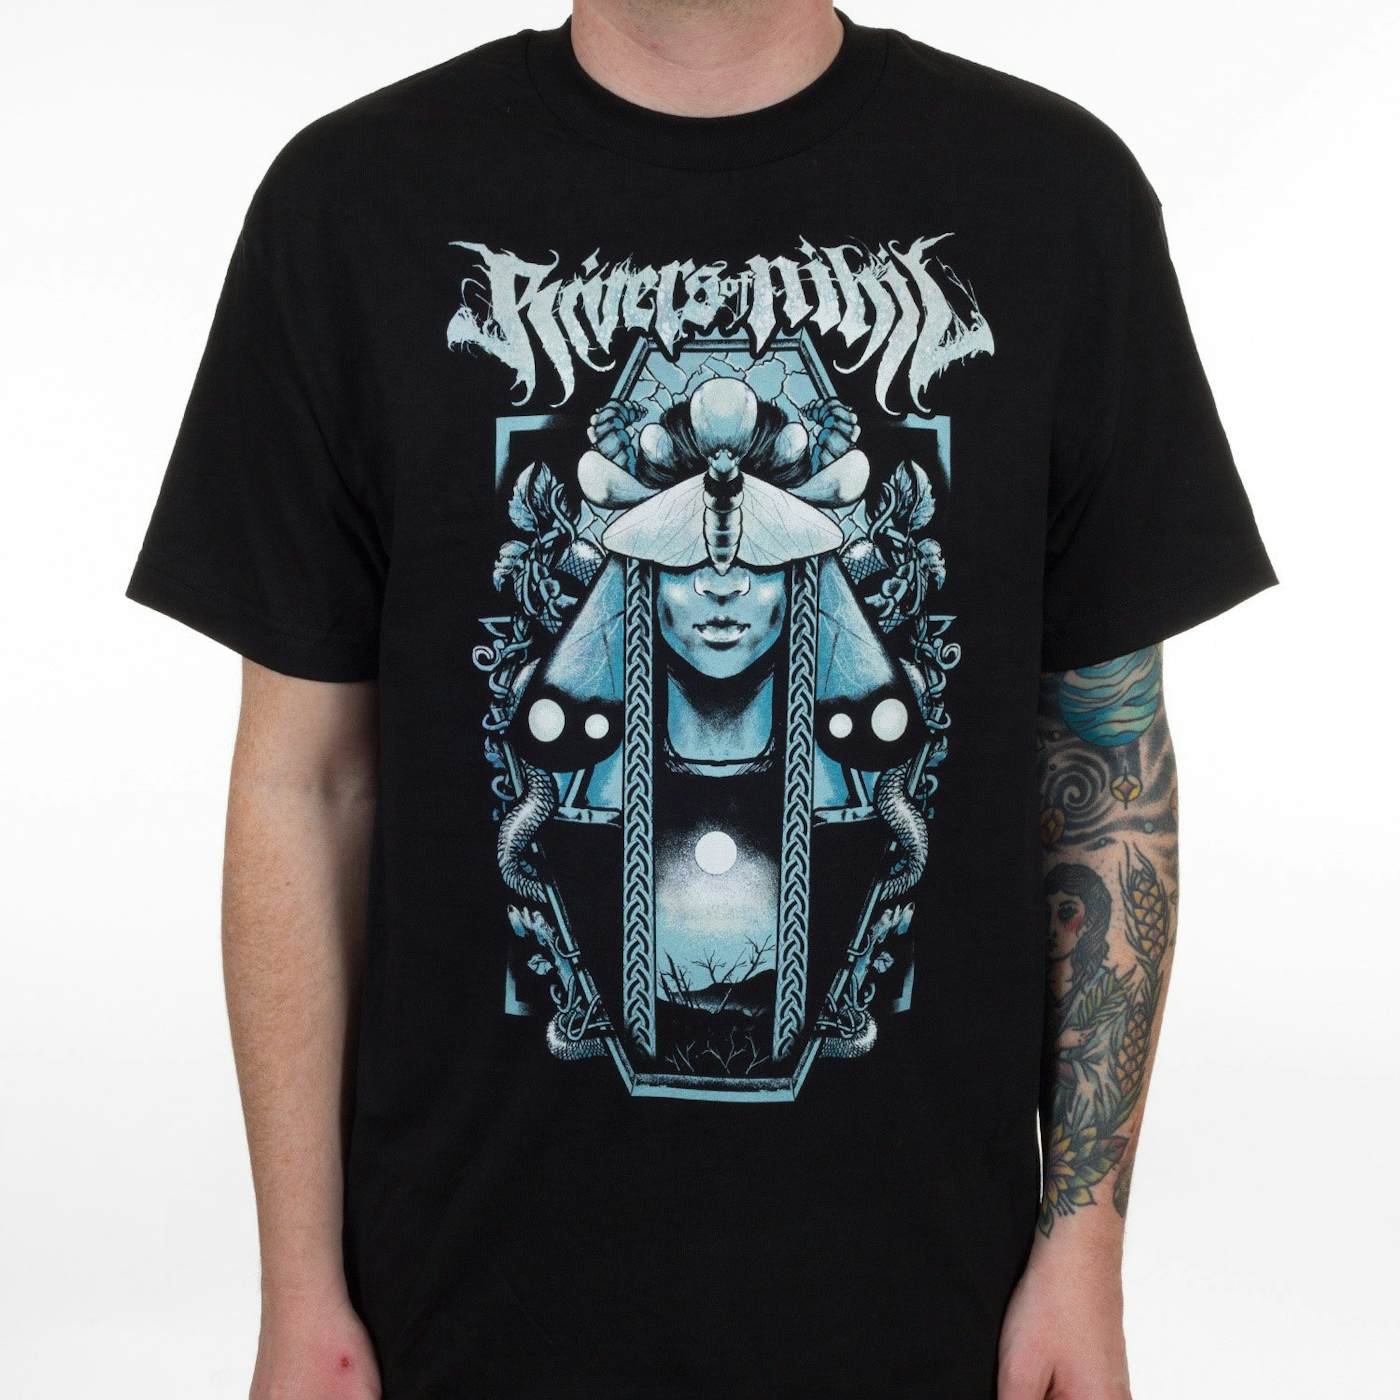 Rivers of Nihil "The Monarch" T-Shirt